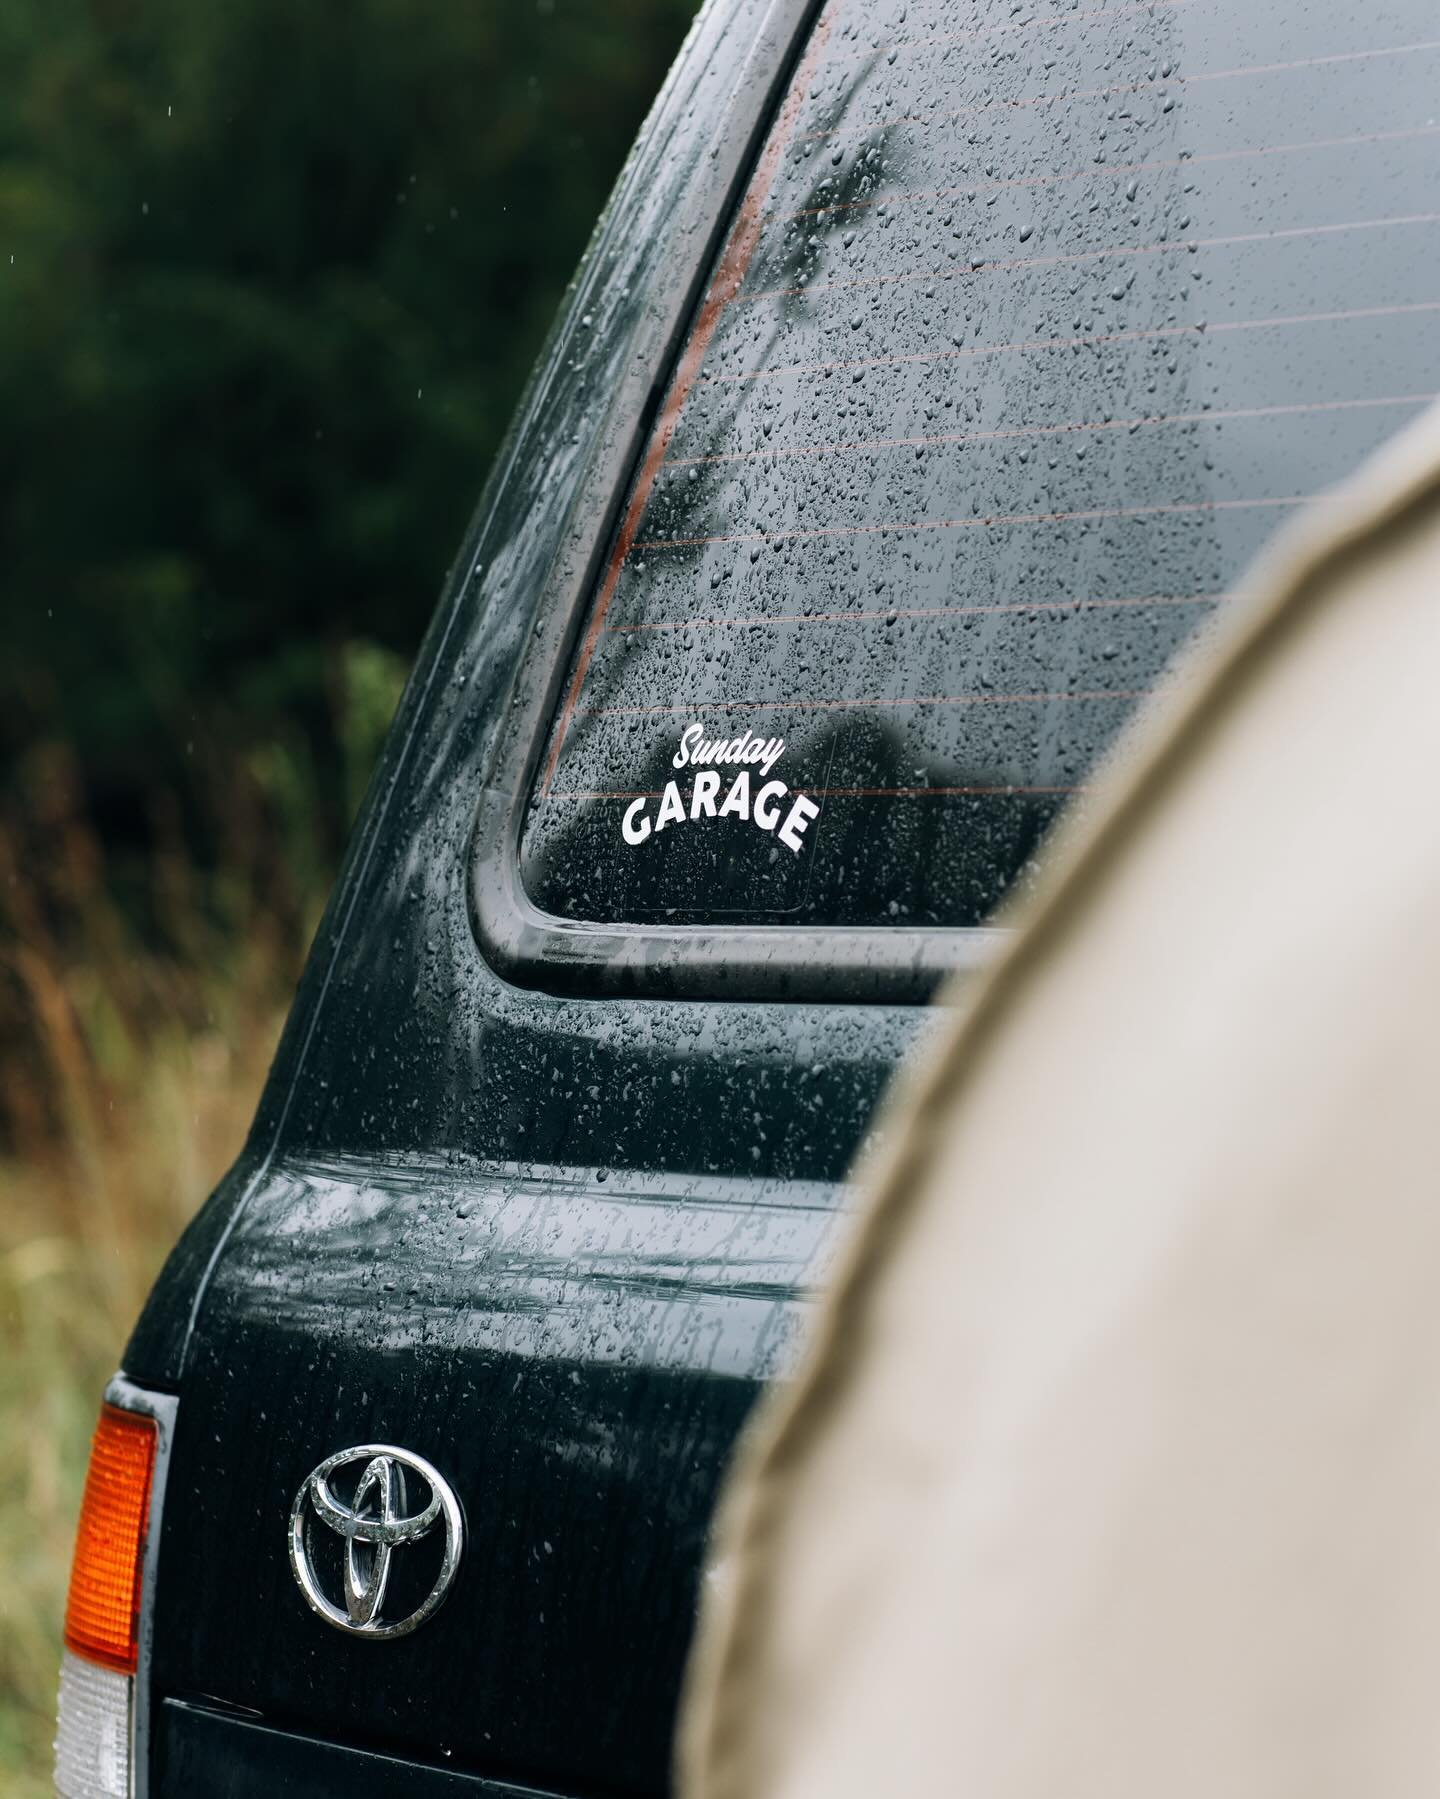 Stickers are back! Get in quick. 

#4wd #4x4 #classic #classiccar #landcruiser #landrover